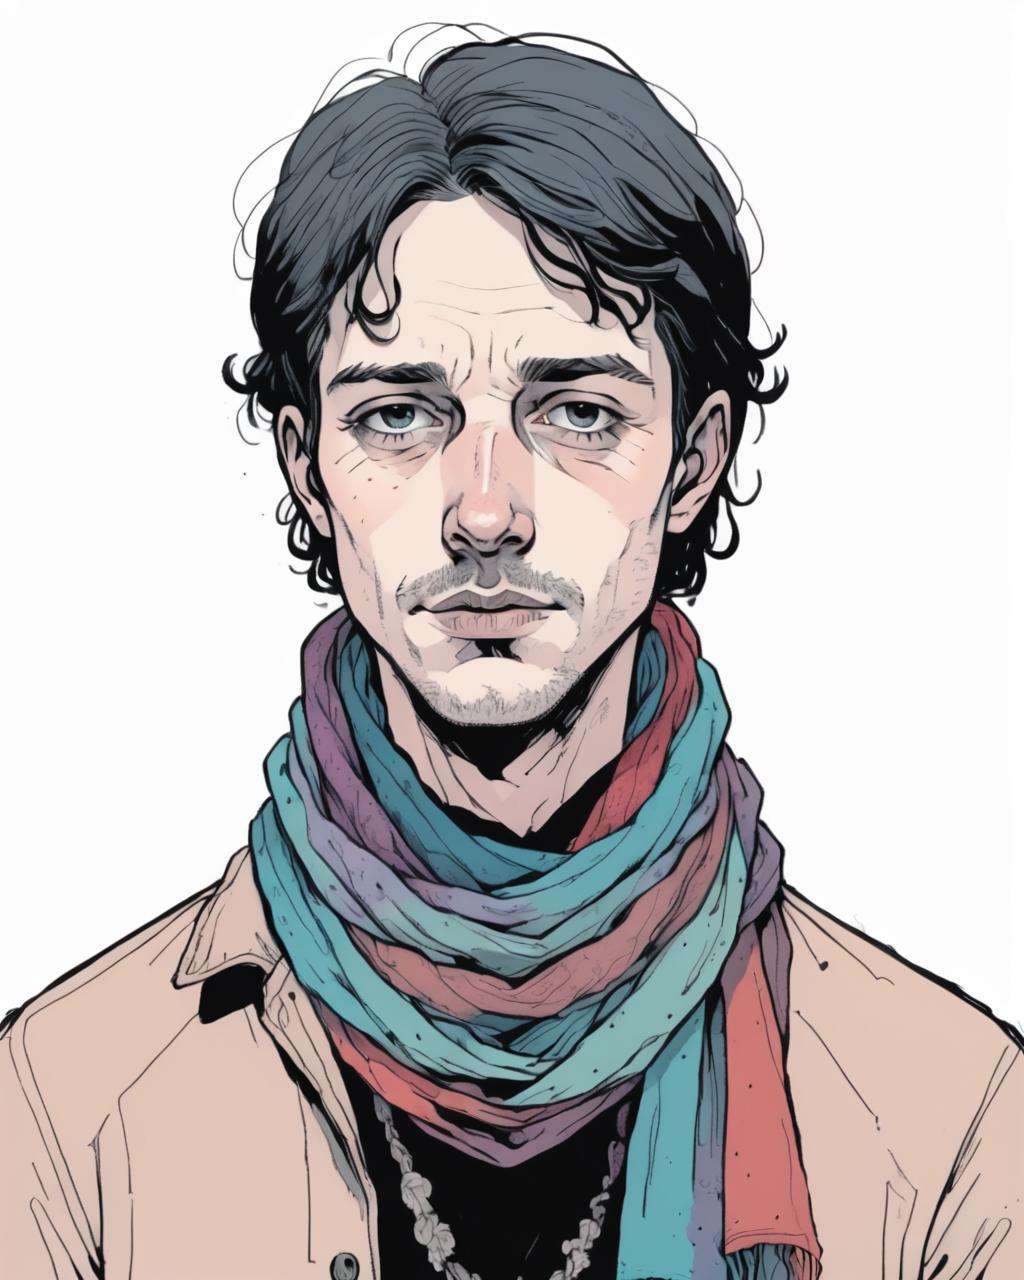 a man with a scarf around his neck<lora:Soulful_Aesthetics_sdxl:1.0>